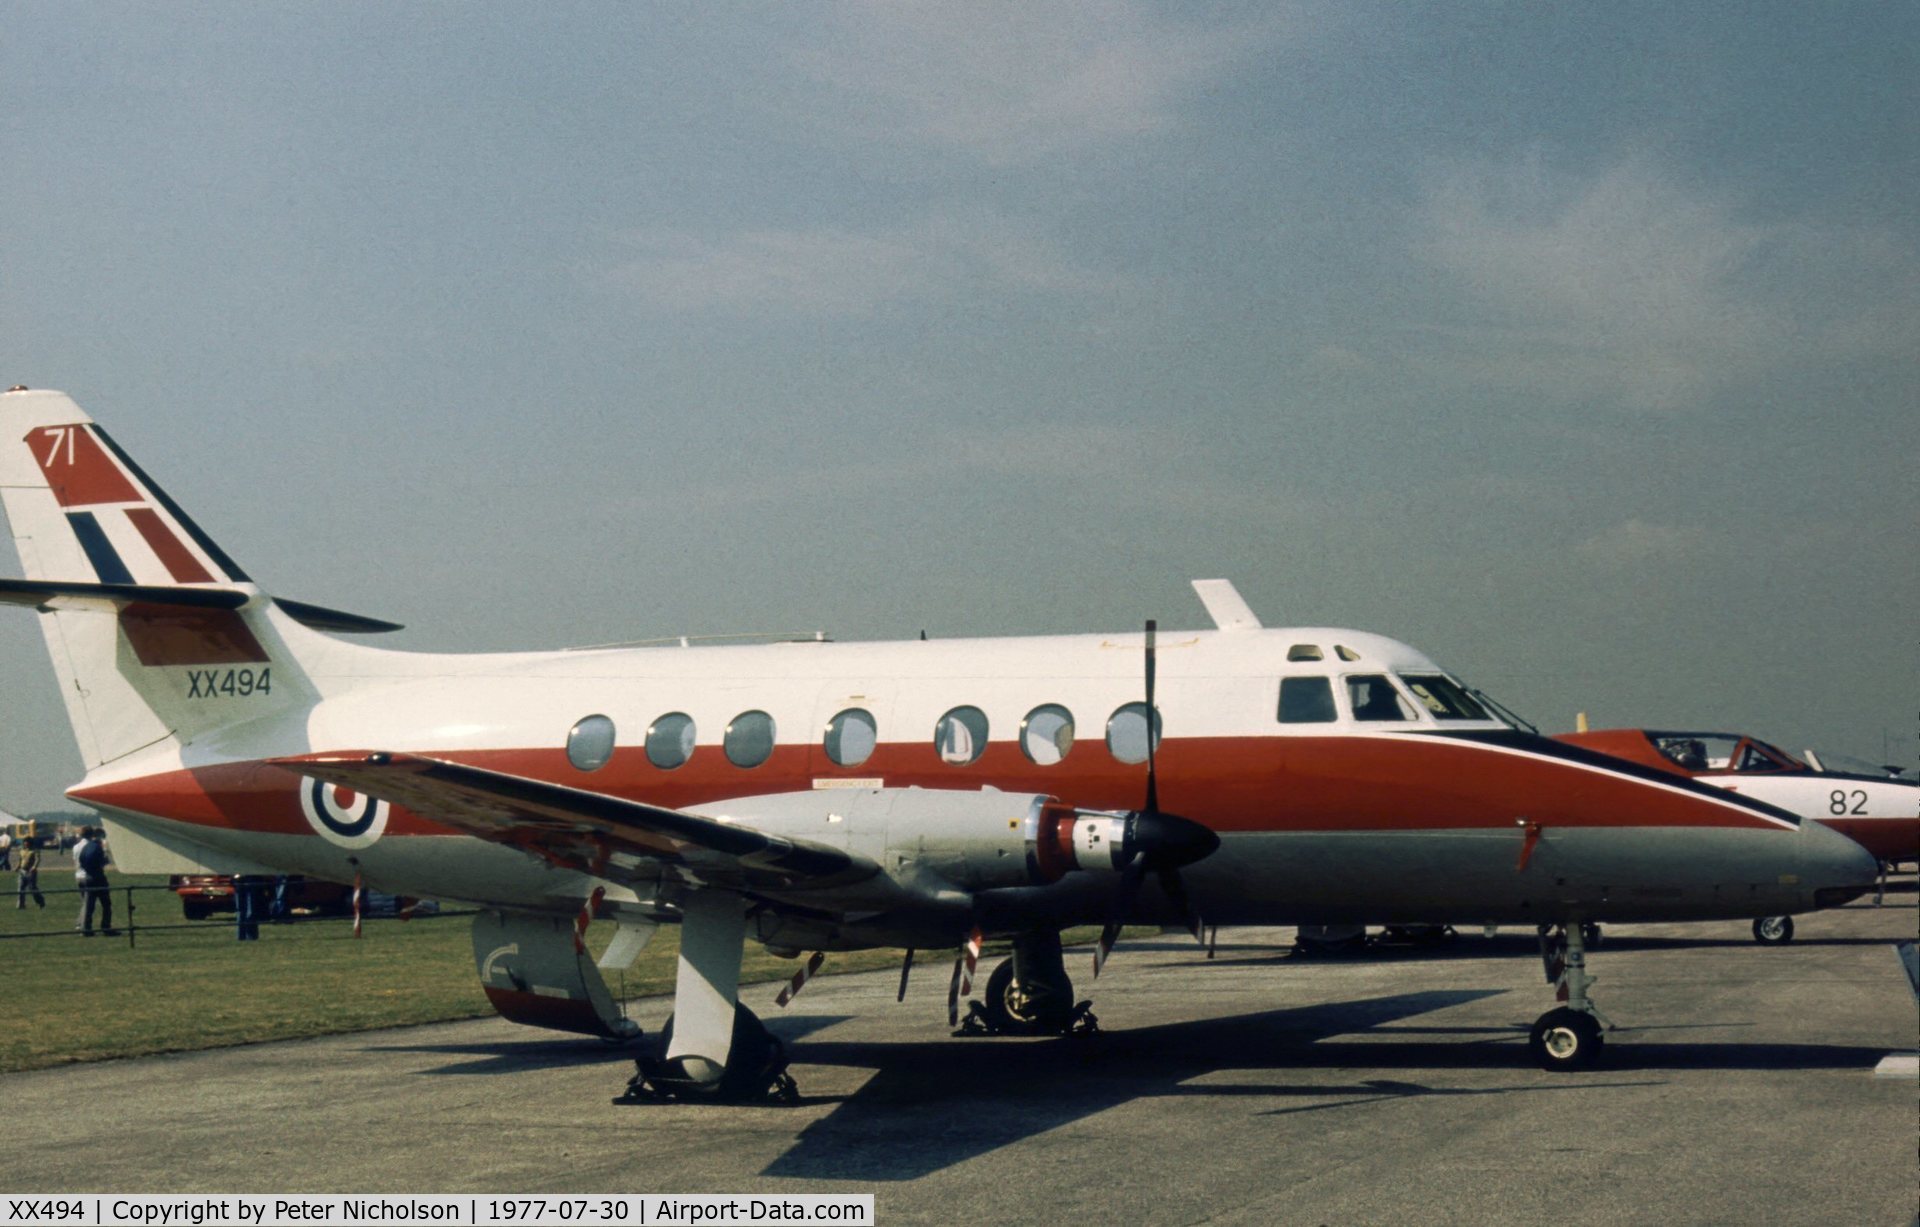 XX494, 1975 Scottish Aviation HP-137 Jetstream T.1 C/N 422, Jetstream T.1 of the Multi-Engine Training Squadron on display at the 1977 Royal Review at RAF Finningley.